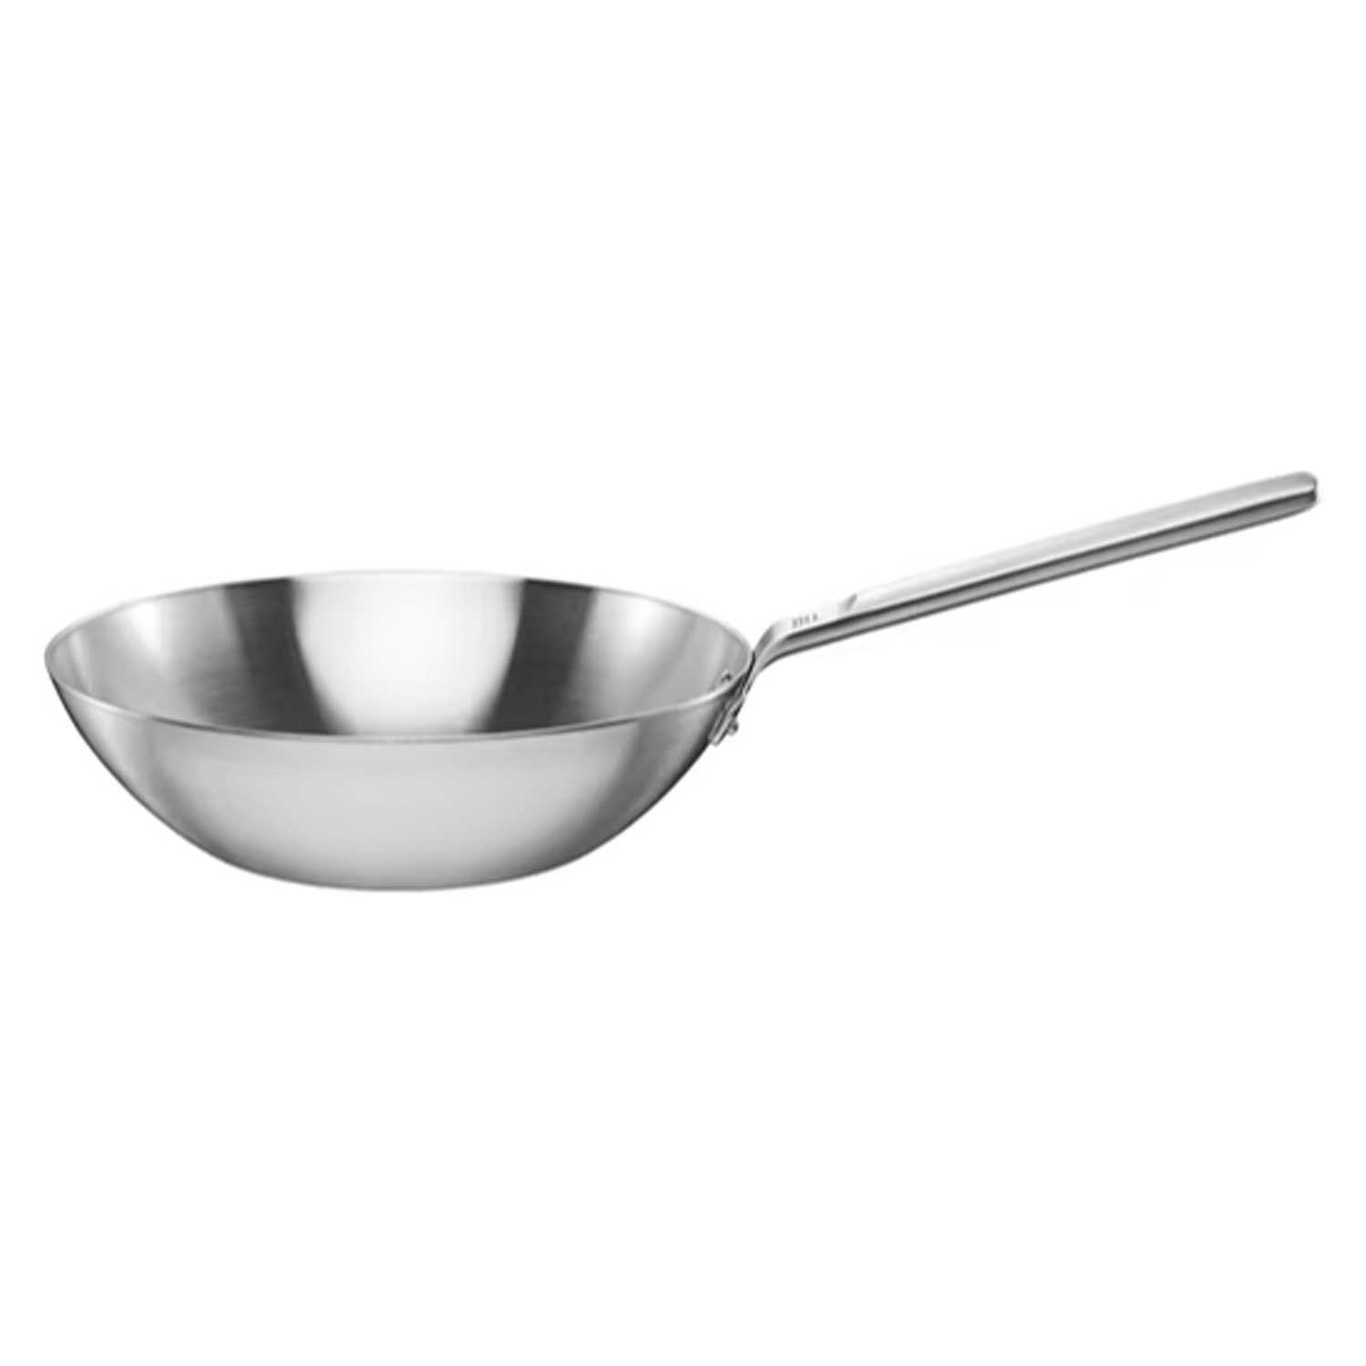 Norden Wok Pan Uncoated Stainless Steel, 28 cm